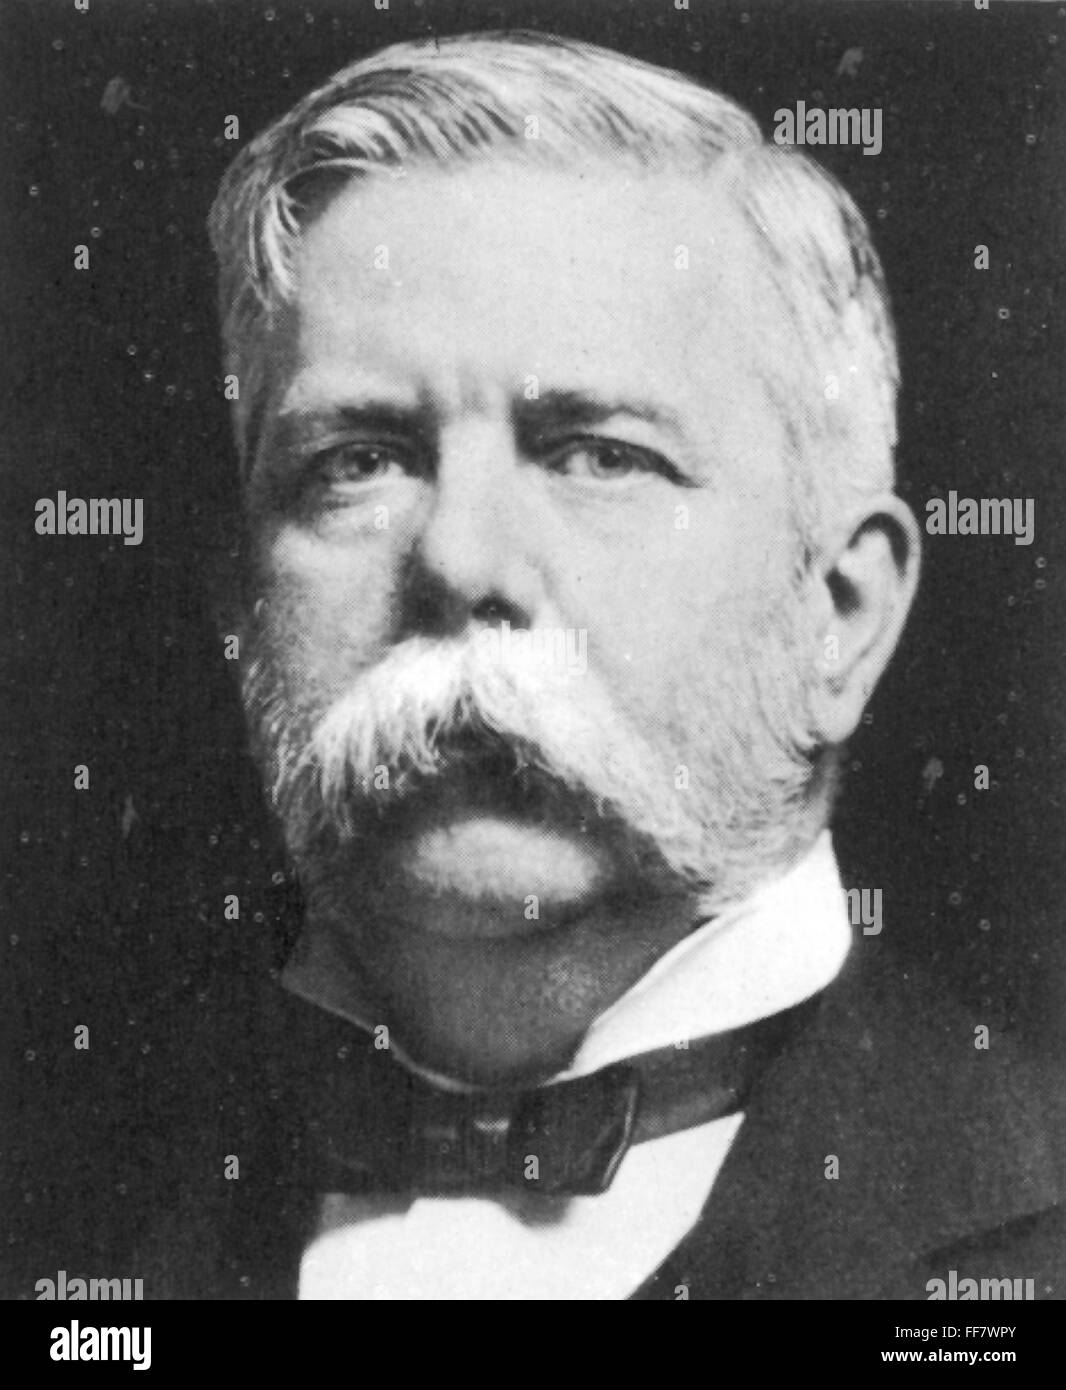 Electricity Pioneer New 8x10 Photo: George Westinghouse Businessman Inventor 